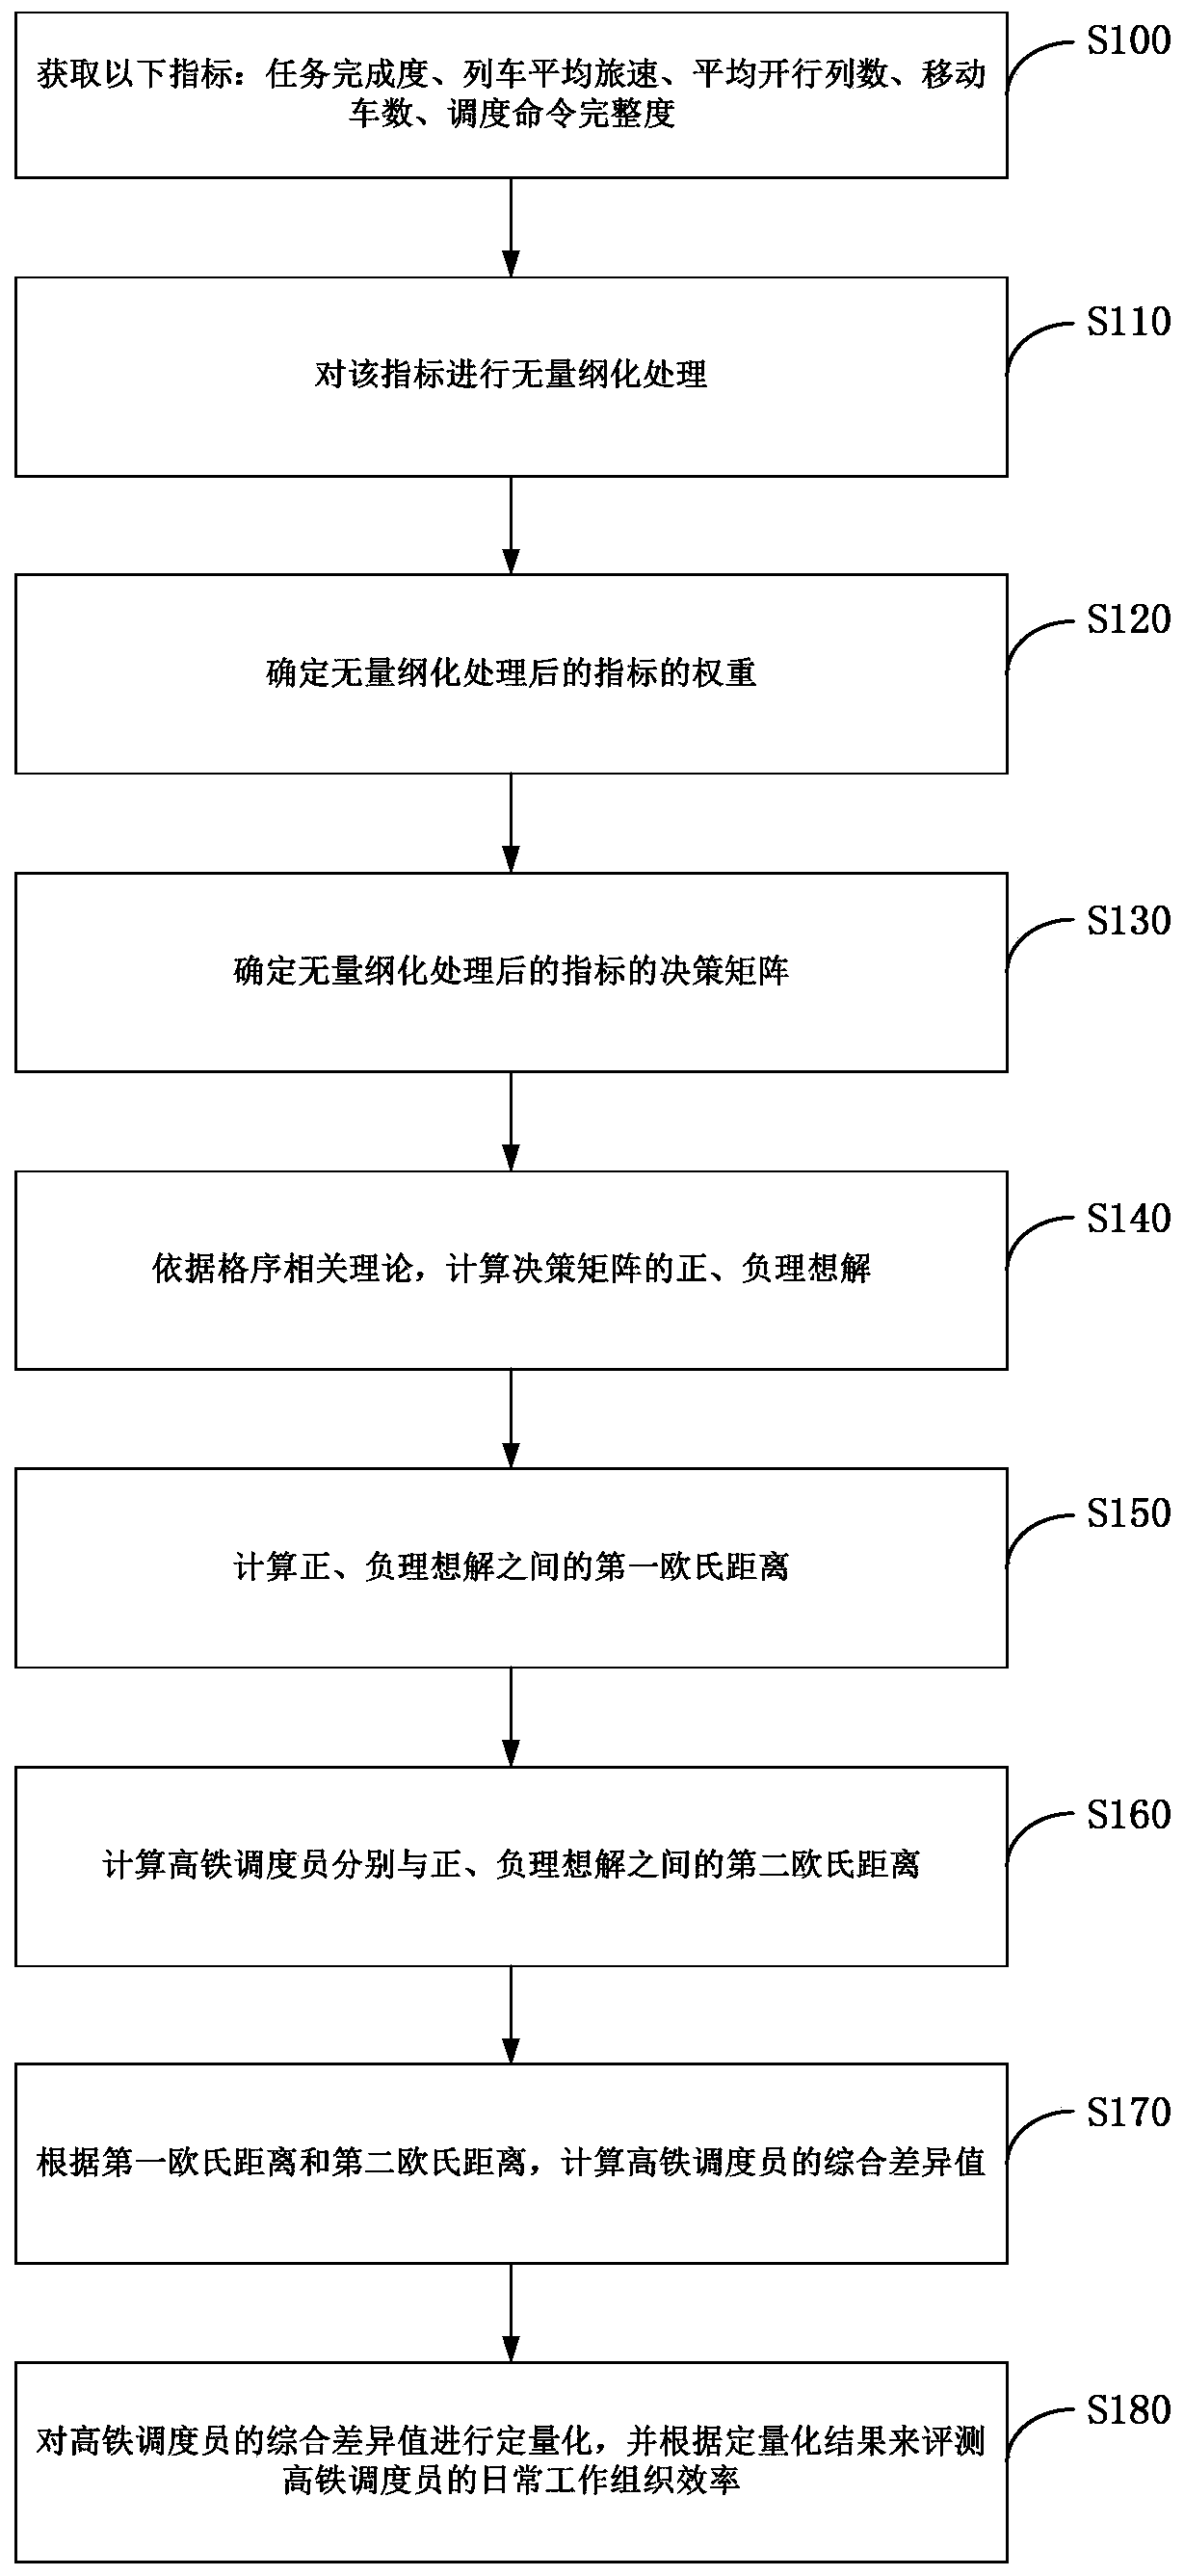 Method for evaluating work organization efficiency of high-speed rail dispatchers and related methods and systems